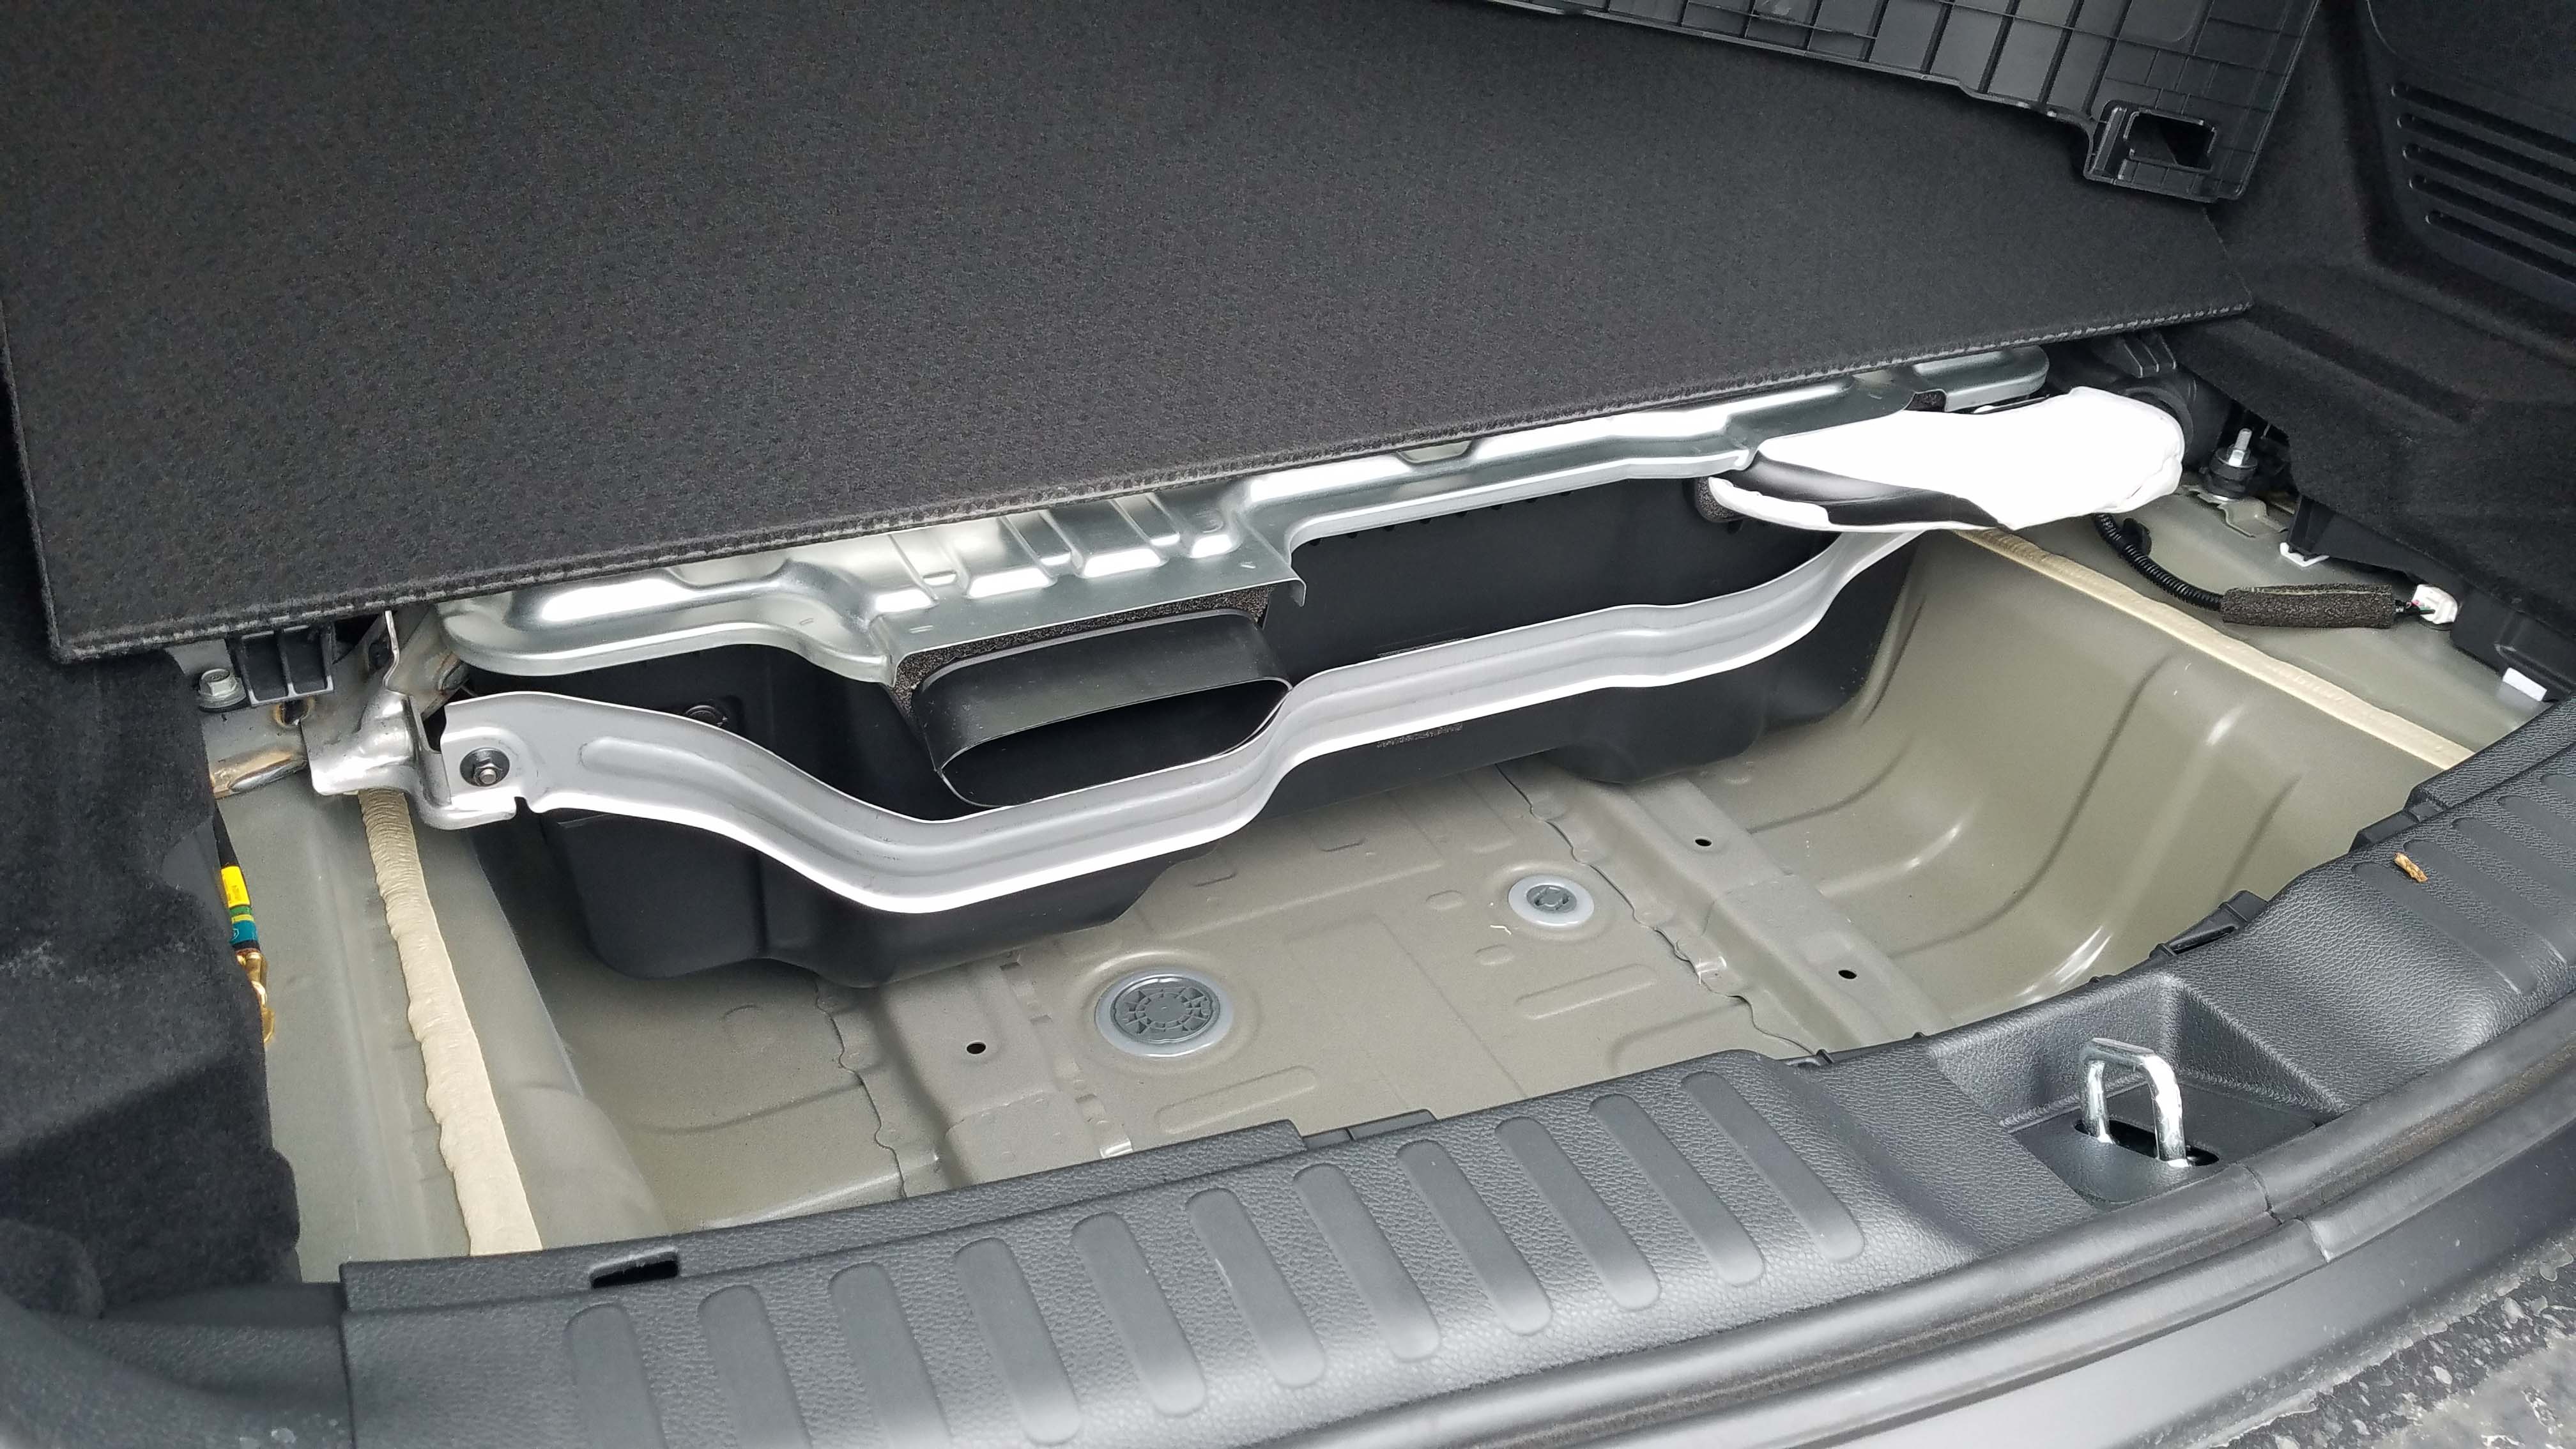 The 1.4 kWh battery for the 2020 Honda CR-V Hybrid is stored under the rear cargo area — taking up space where a spare tire would normally be.